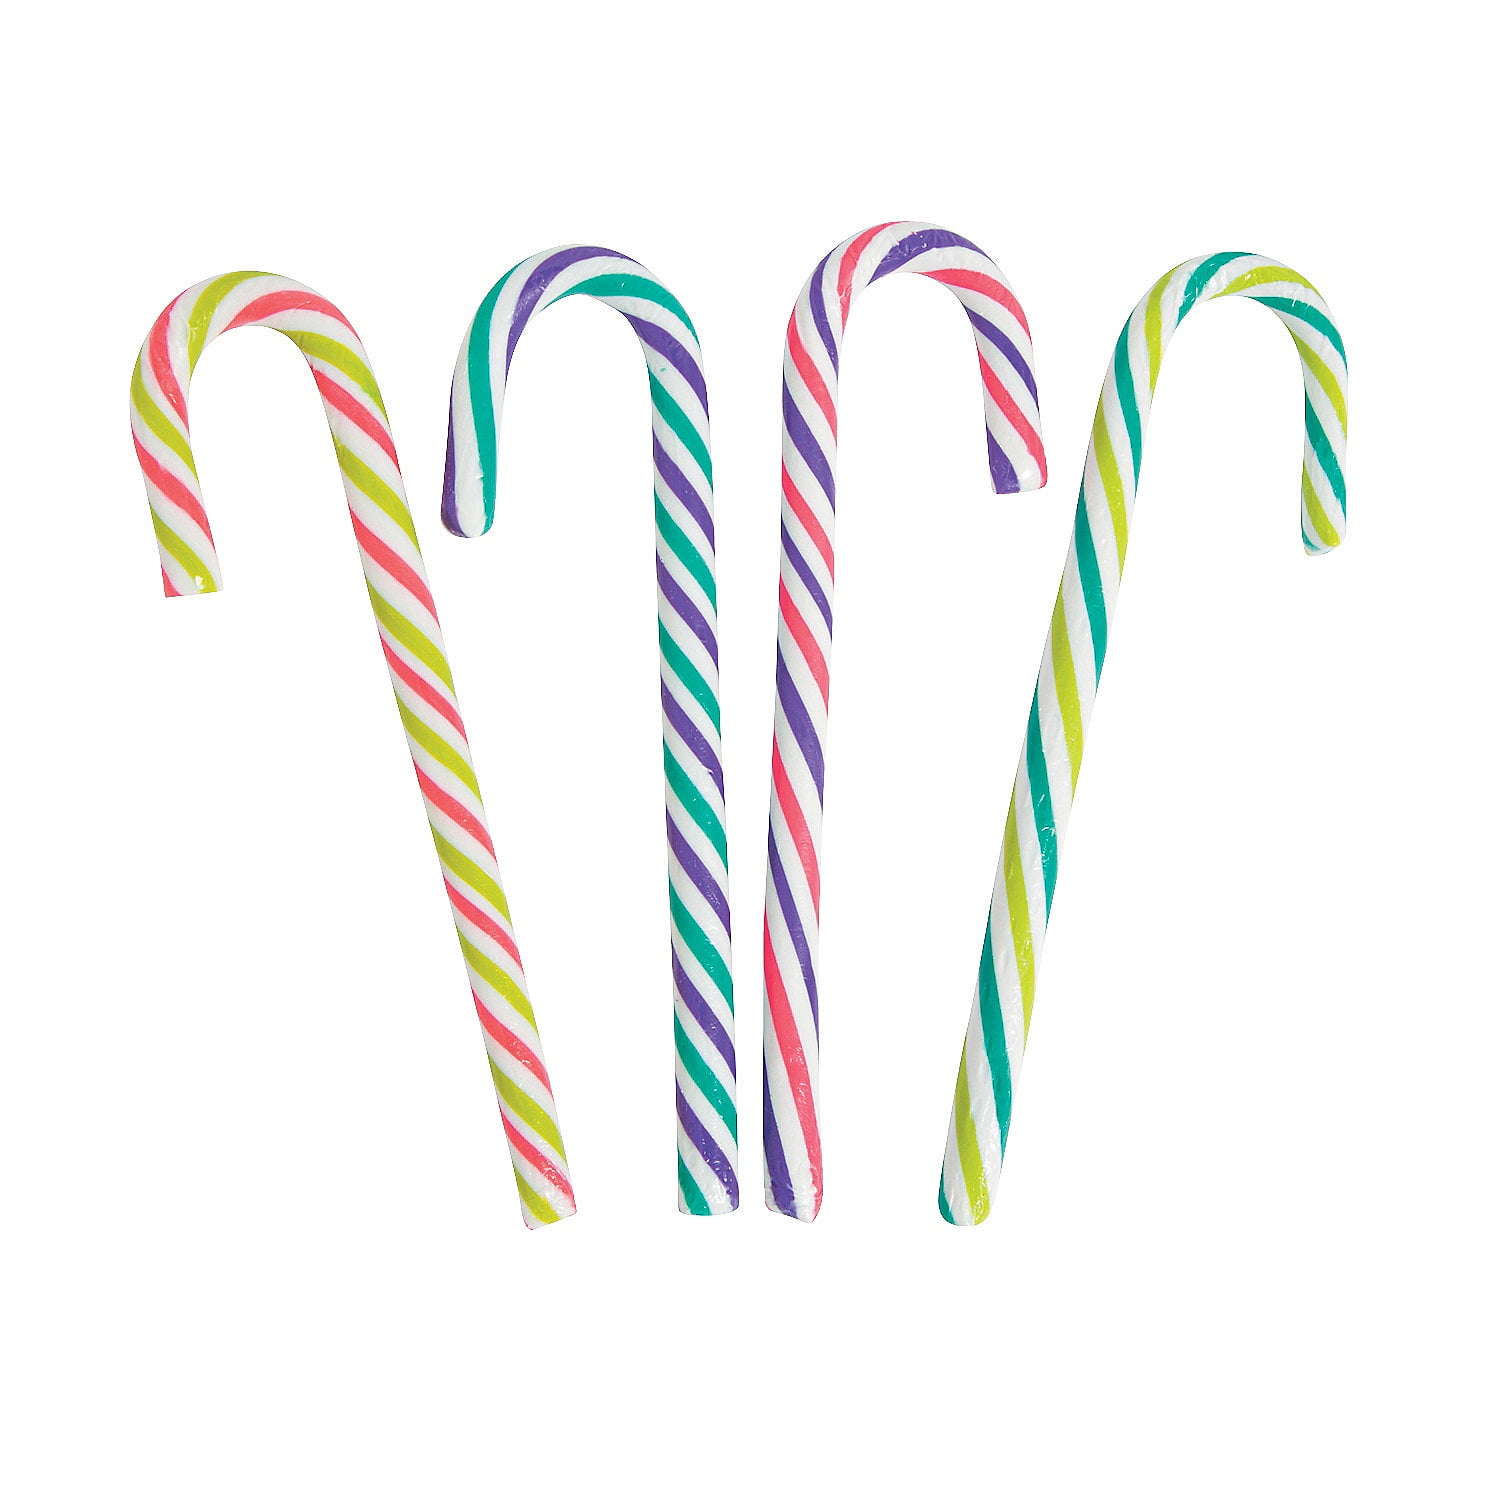 Where can i buy candy canes